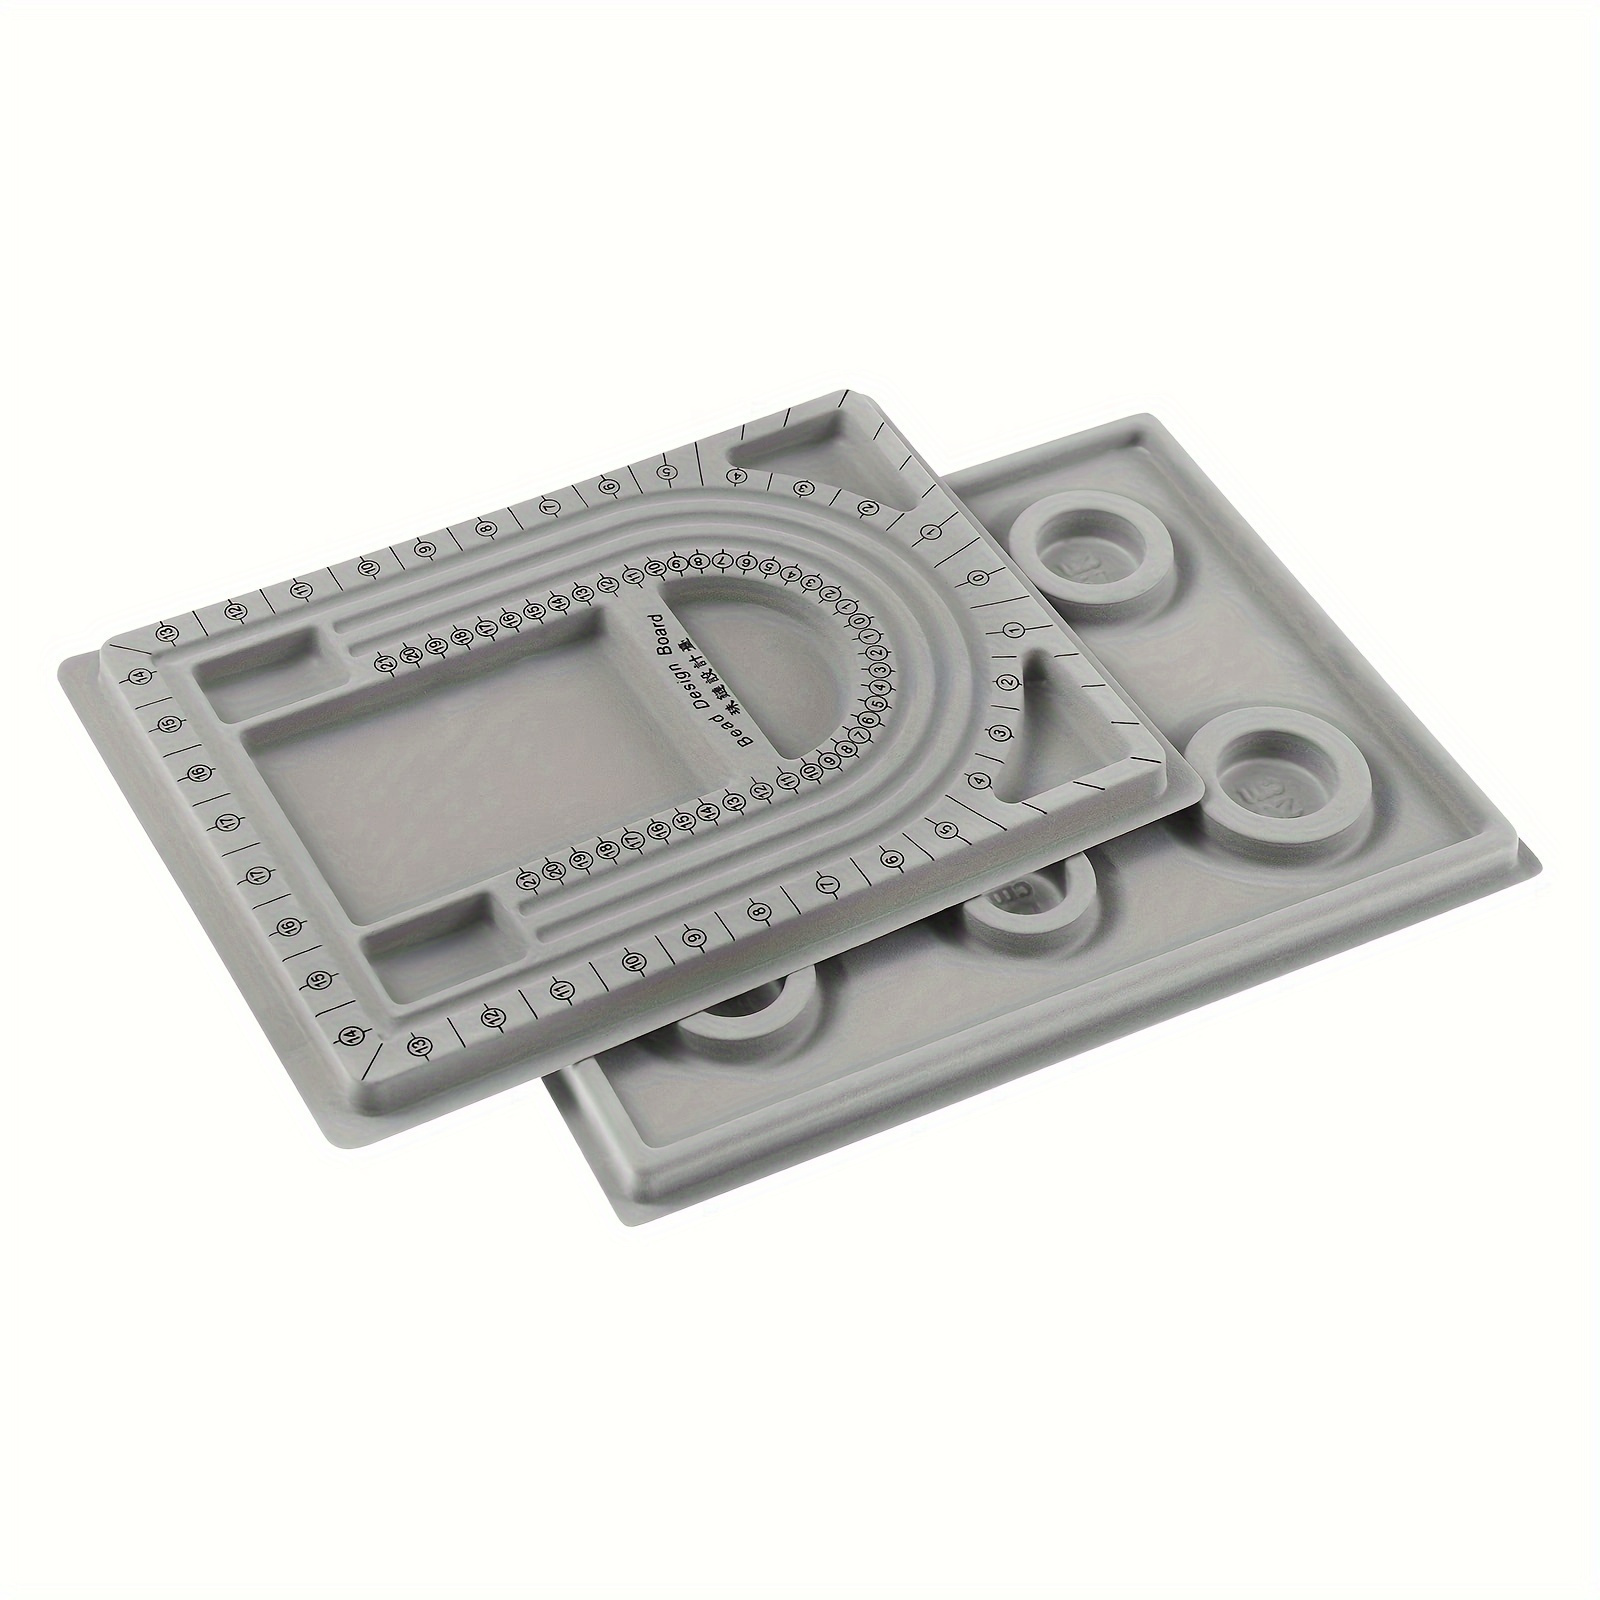 

2pcs Necklace Beading Plastic Board, Diy Jewelry Design Tray, Craft Tool For Necklace Bracelet Making, Gray, 29cm/11.42in X 20cm/7.87in, Organize Beads And Chains